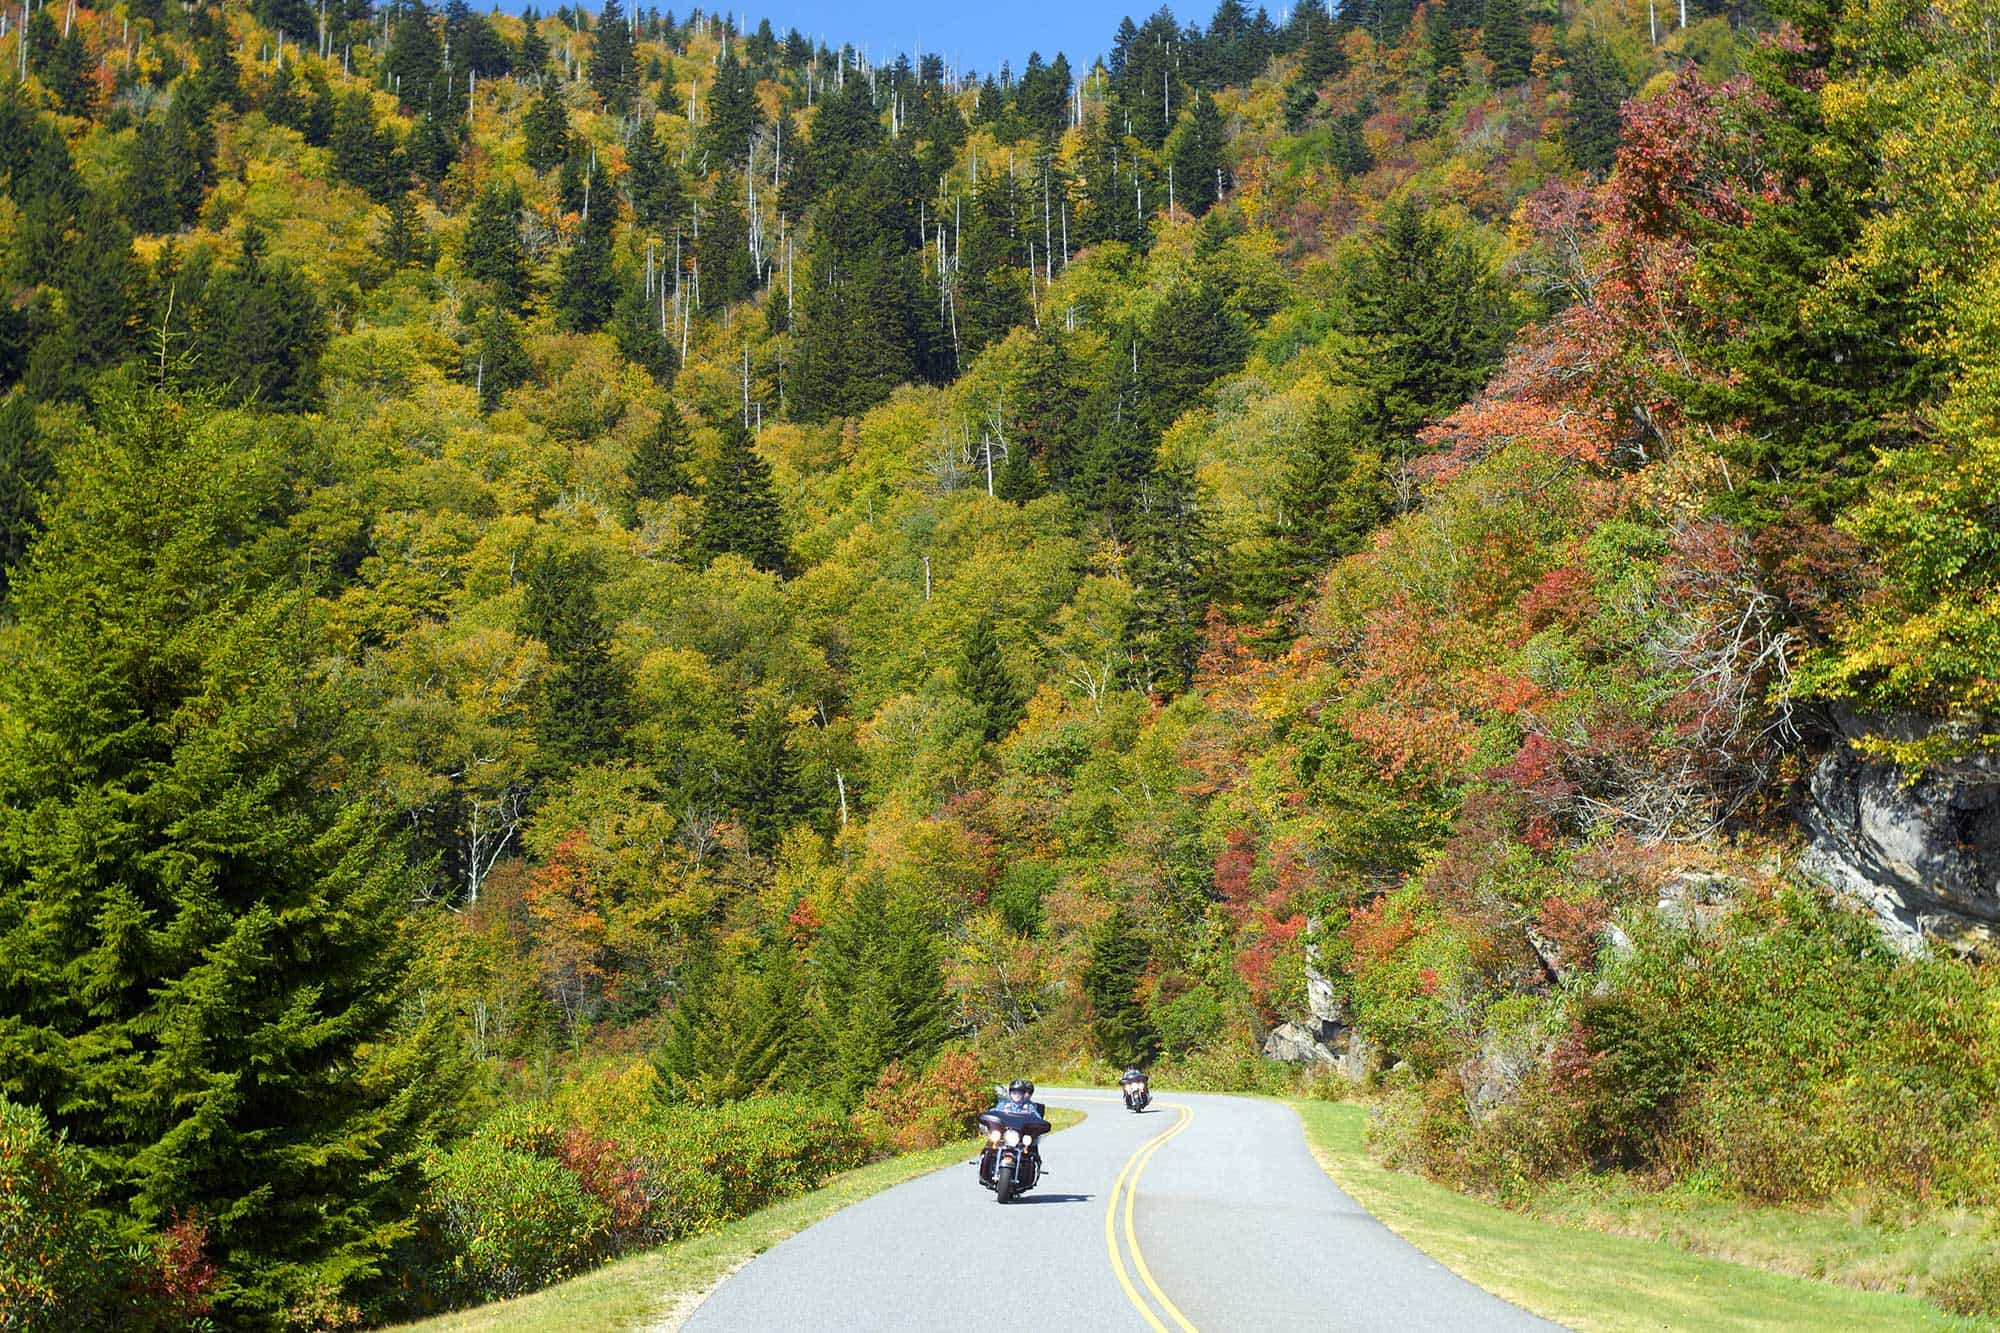 The 4 routes to discover in motorcycle this fall.